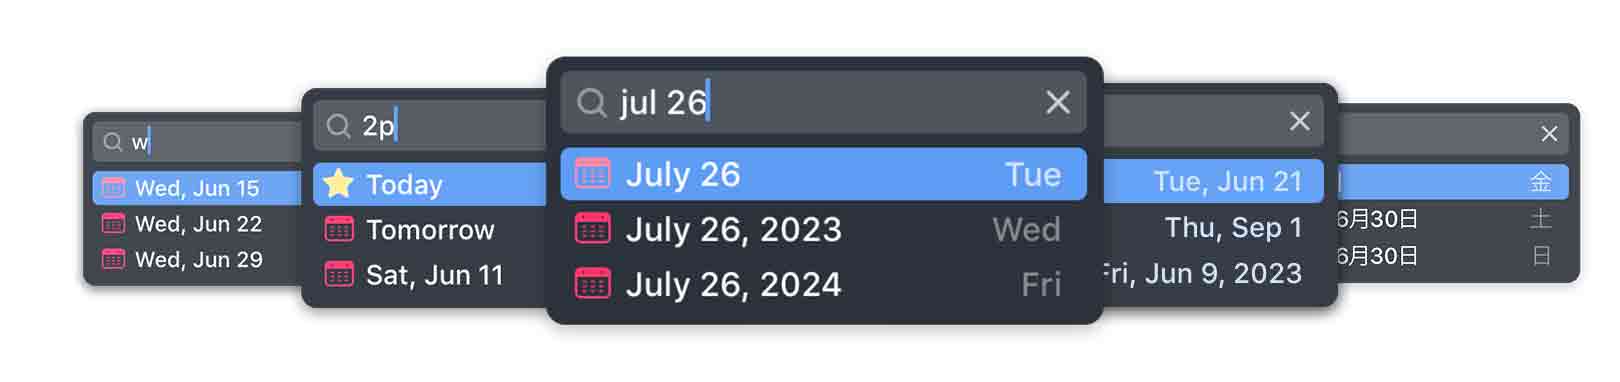 Different exapmles of using natural language in the When date picker